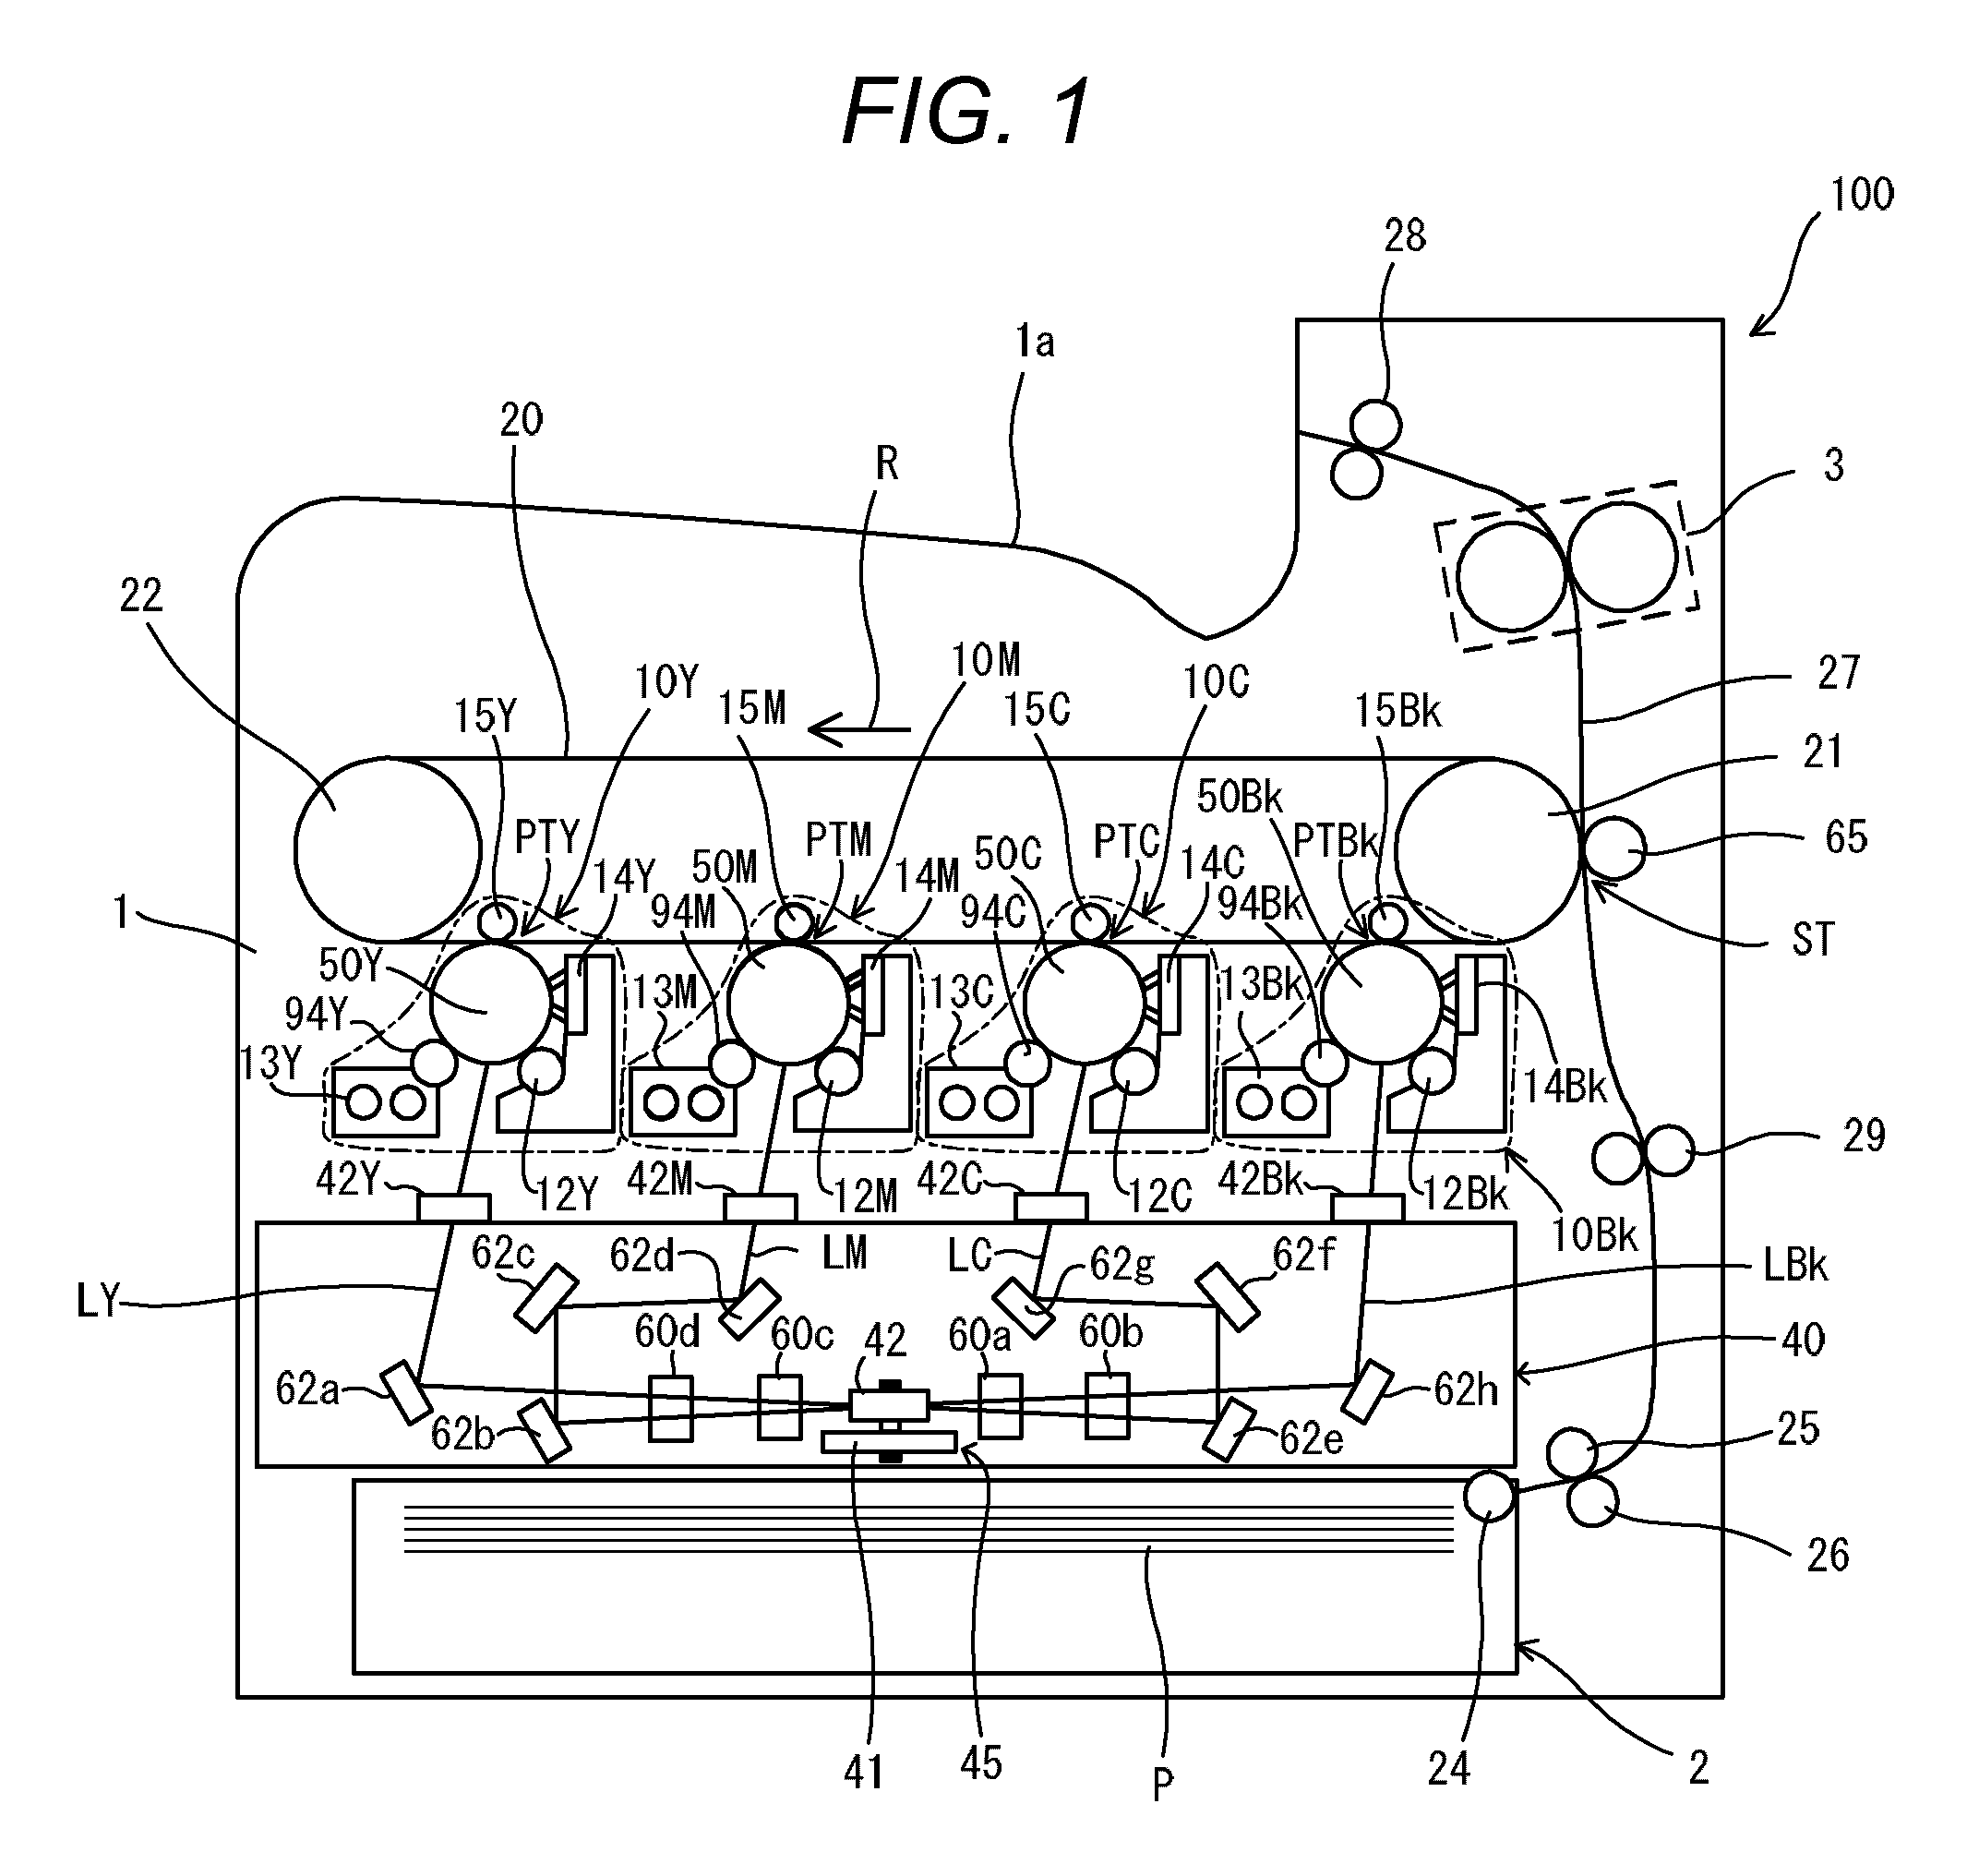 Image forming apparatus with improved timing for emitting beam detect light beam